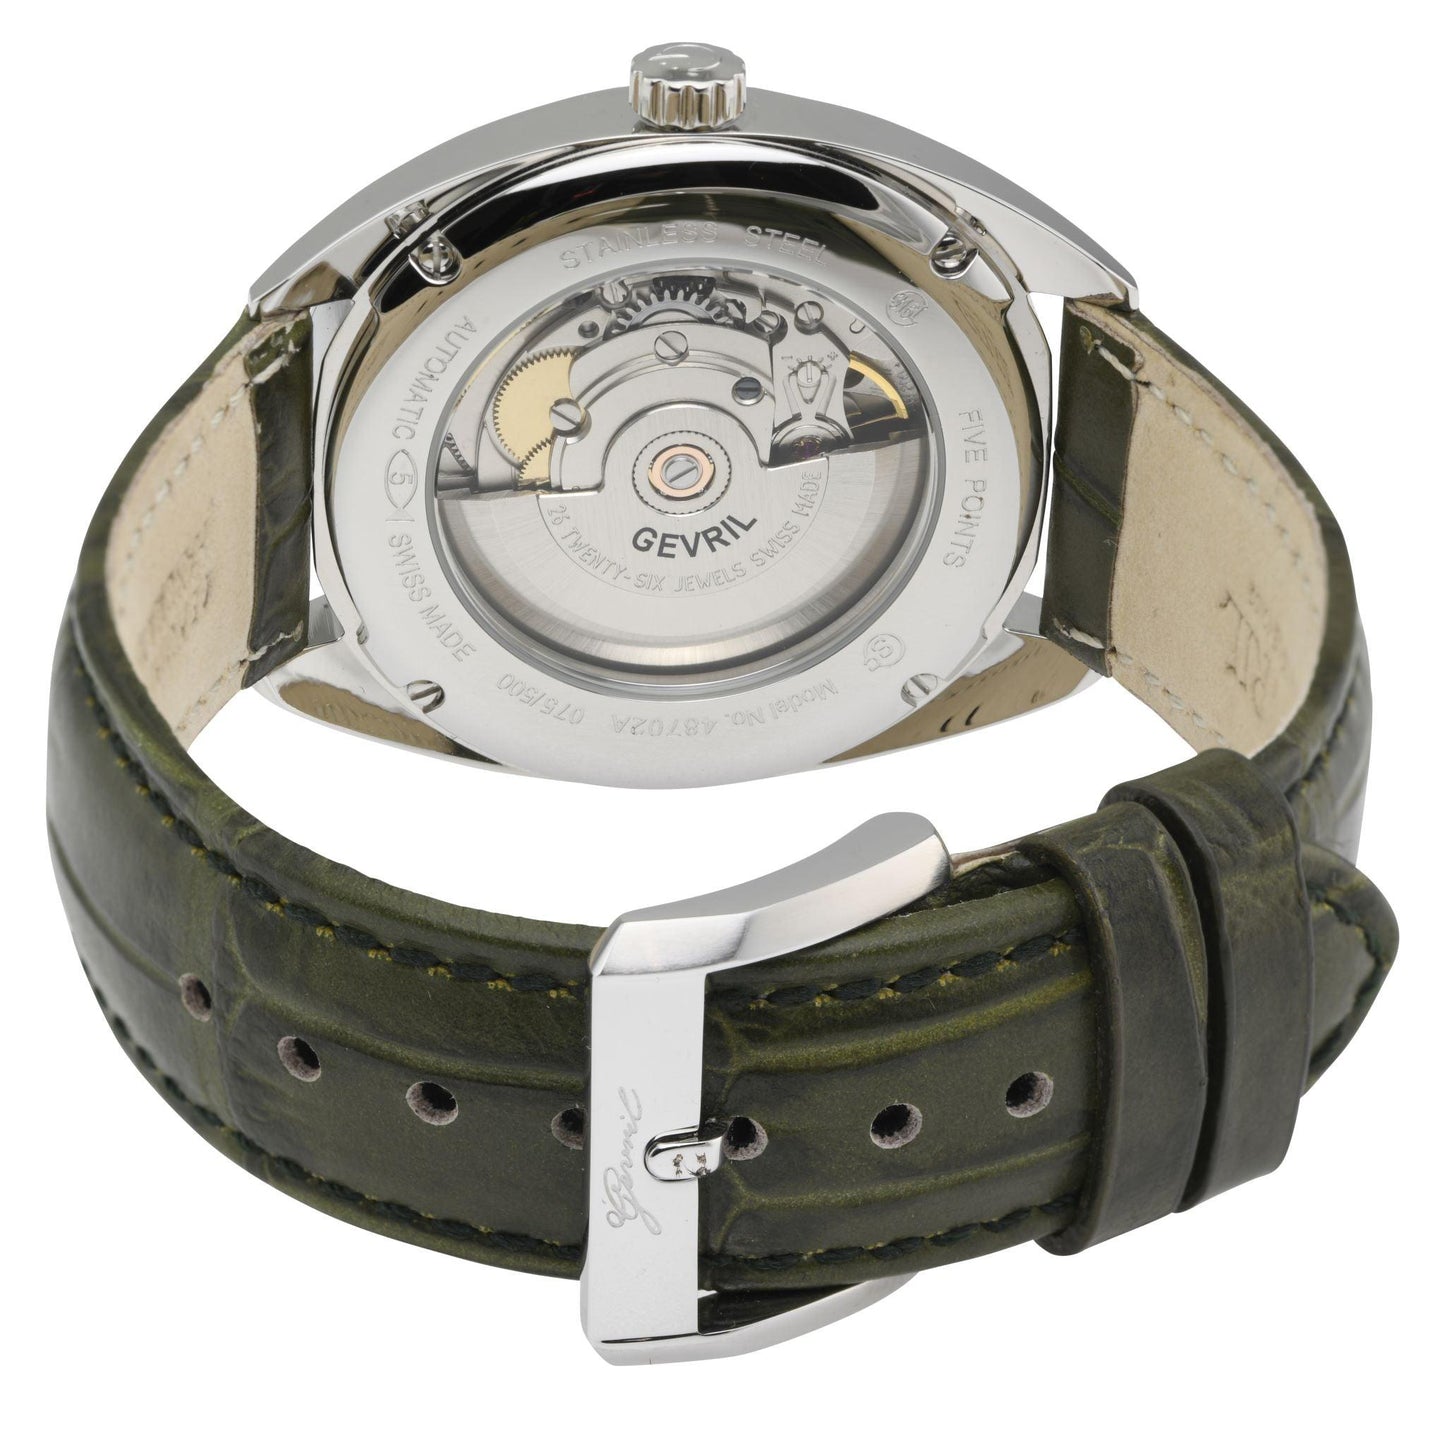 Gevril-Luxury-Swiss-Watches-Gevril Five Points - Automatic-48702A